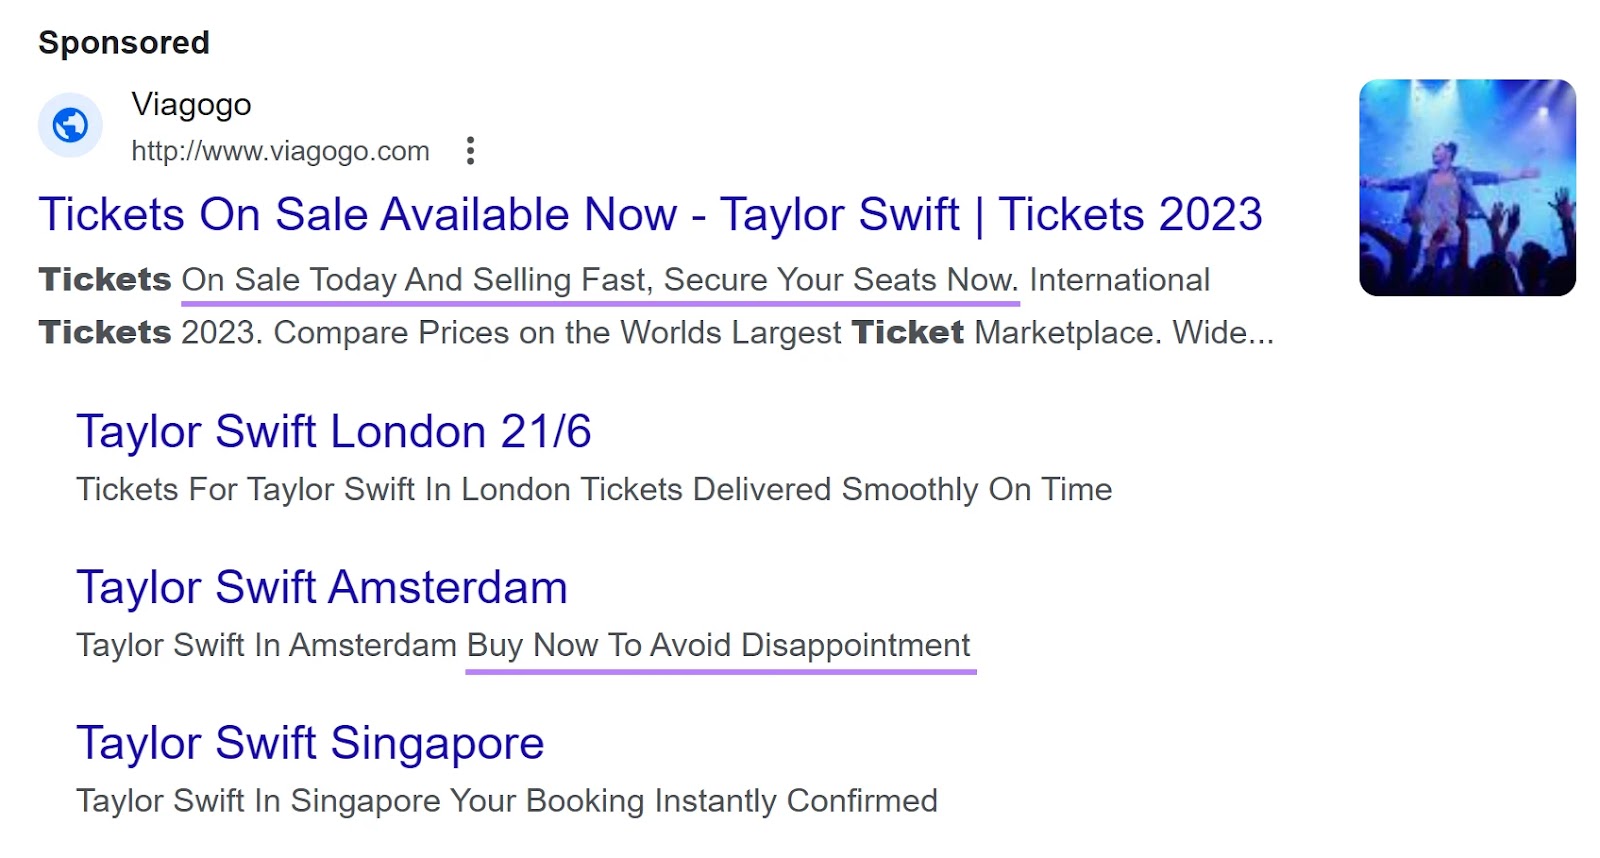 Viagogo's search ad for Taylor Swift concert tickets with "on sale today and selling fast, secure your seats now" copy